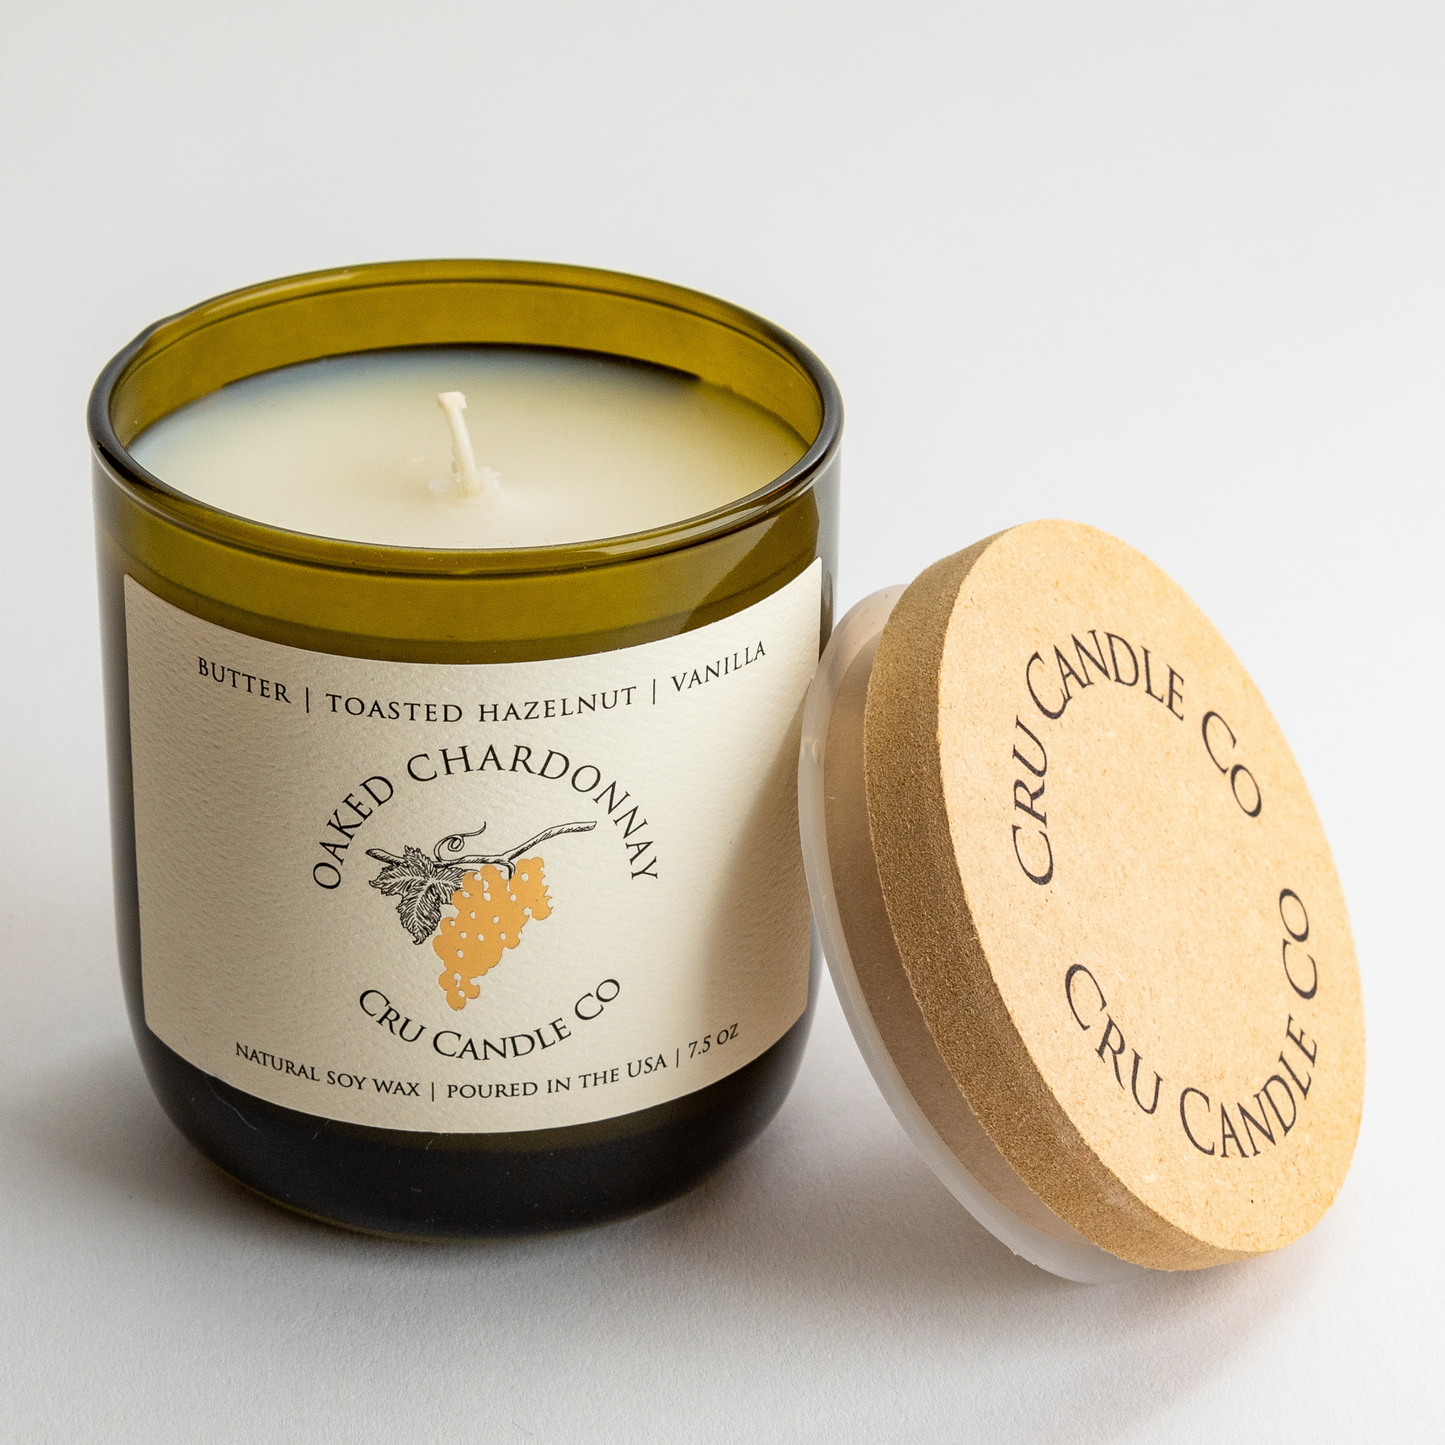 Oaked Chardonnay Candle